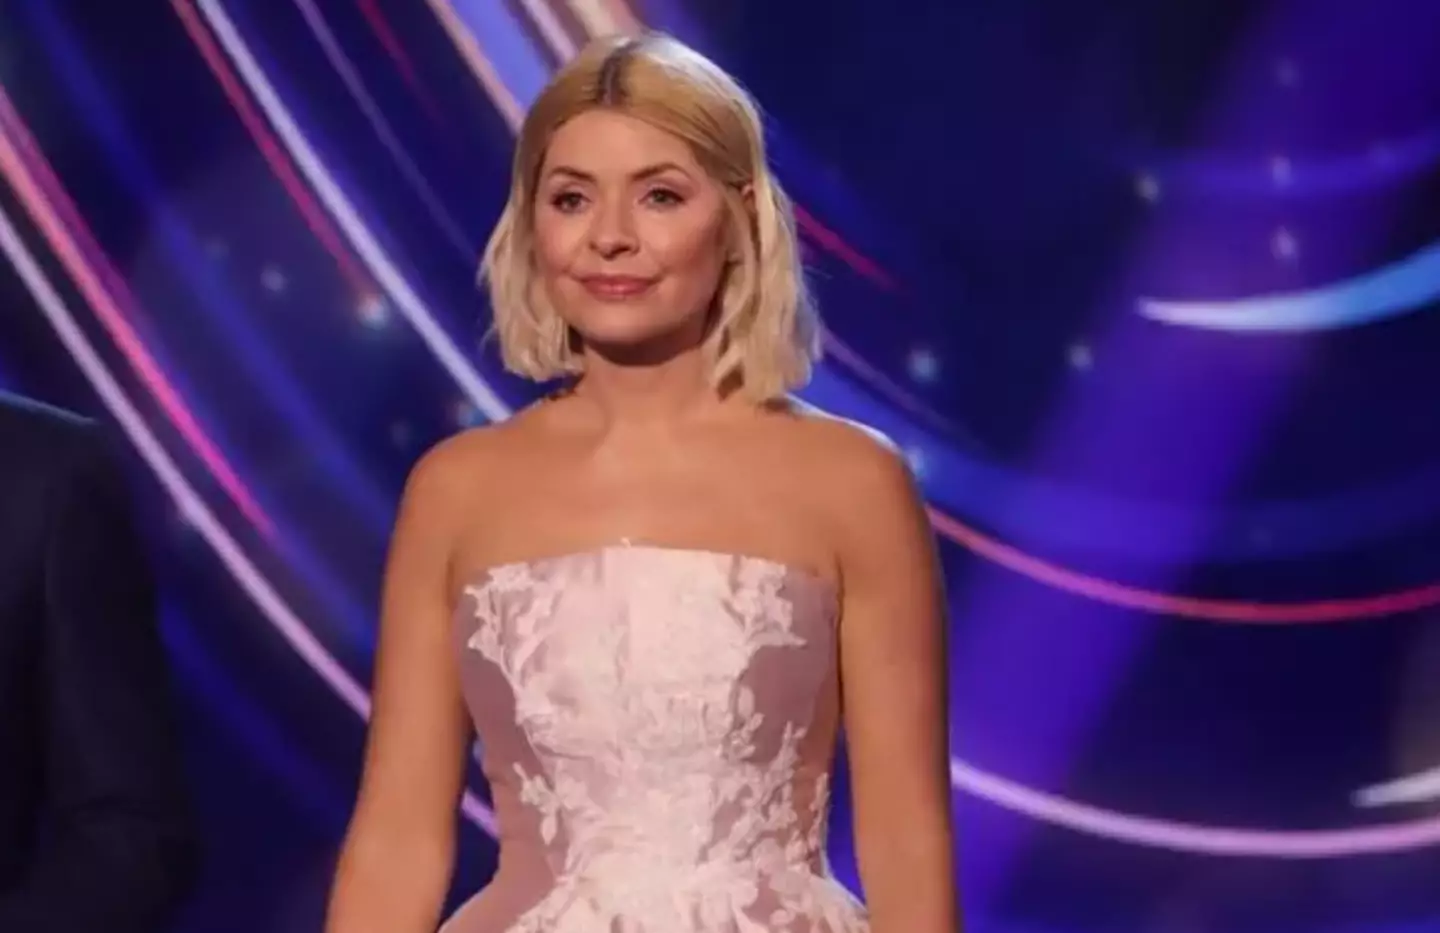 Holly Willoughby is set to return to television in January of next year.